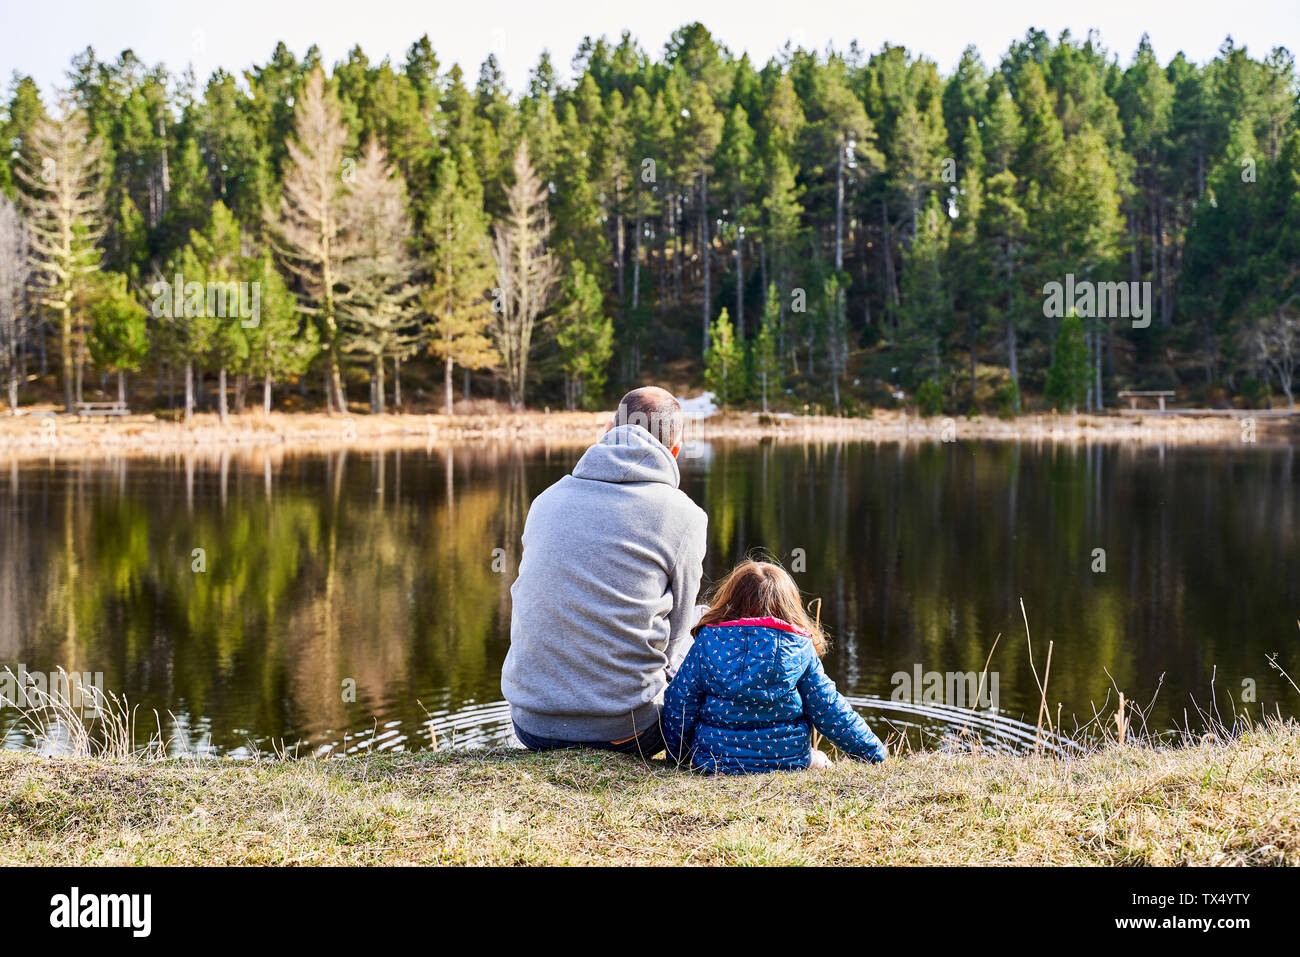 France, Pyrenees, back view of father and little daughter sitting side by side in front a lake Stock Photo